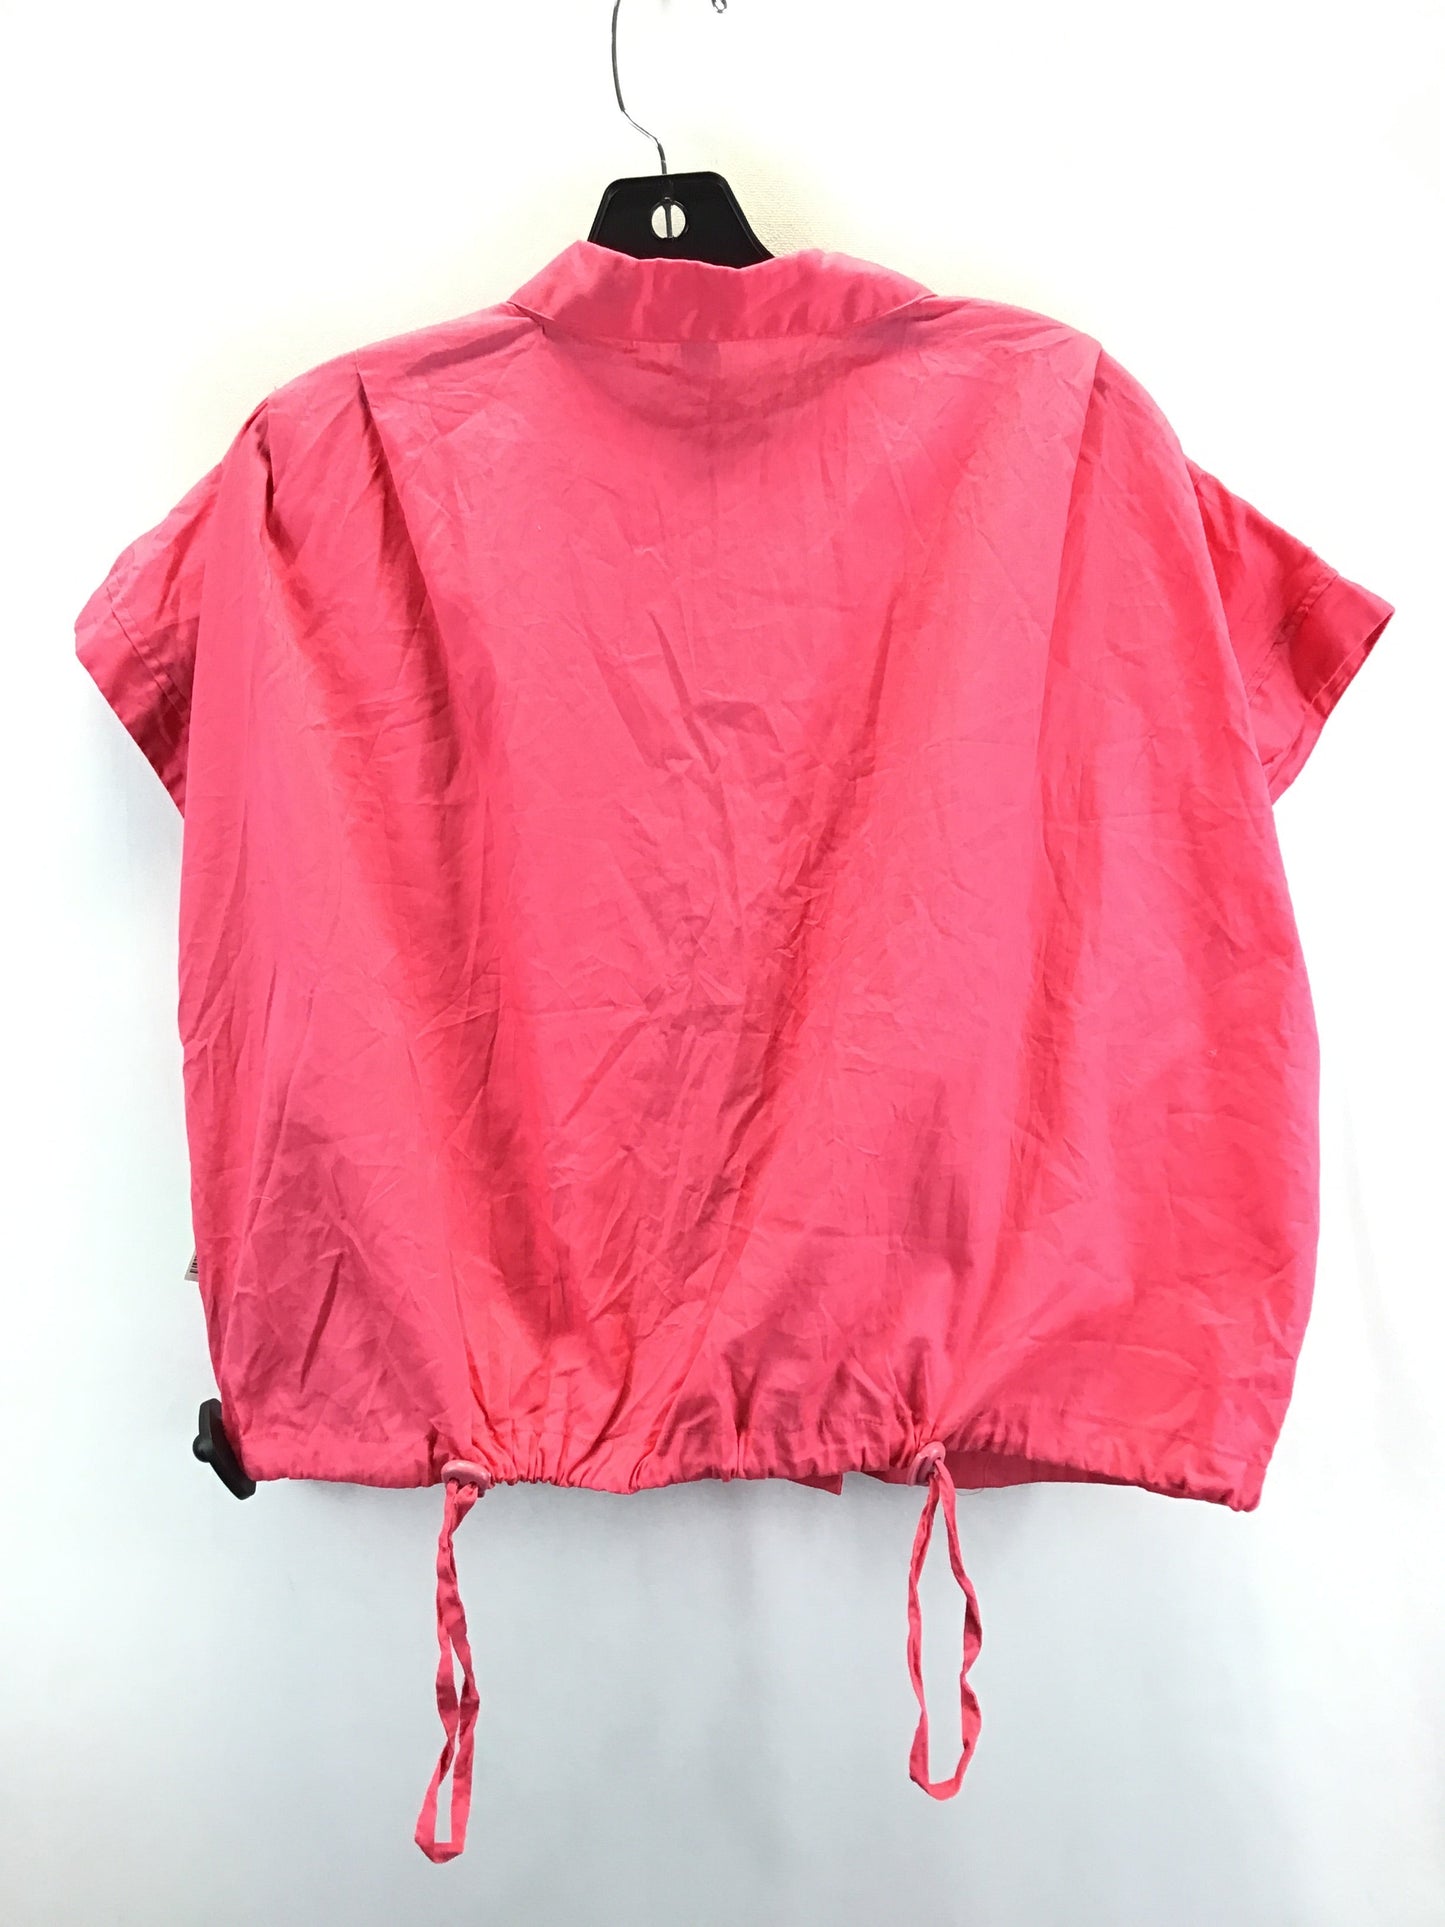 Pink Top Sleeveless Rouge, Size 2x